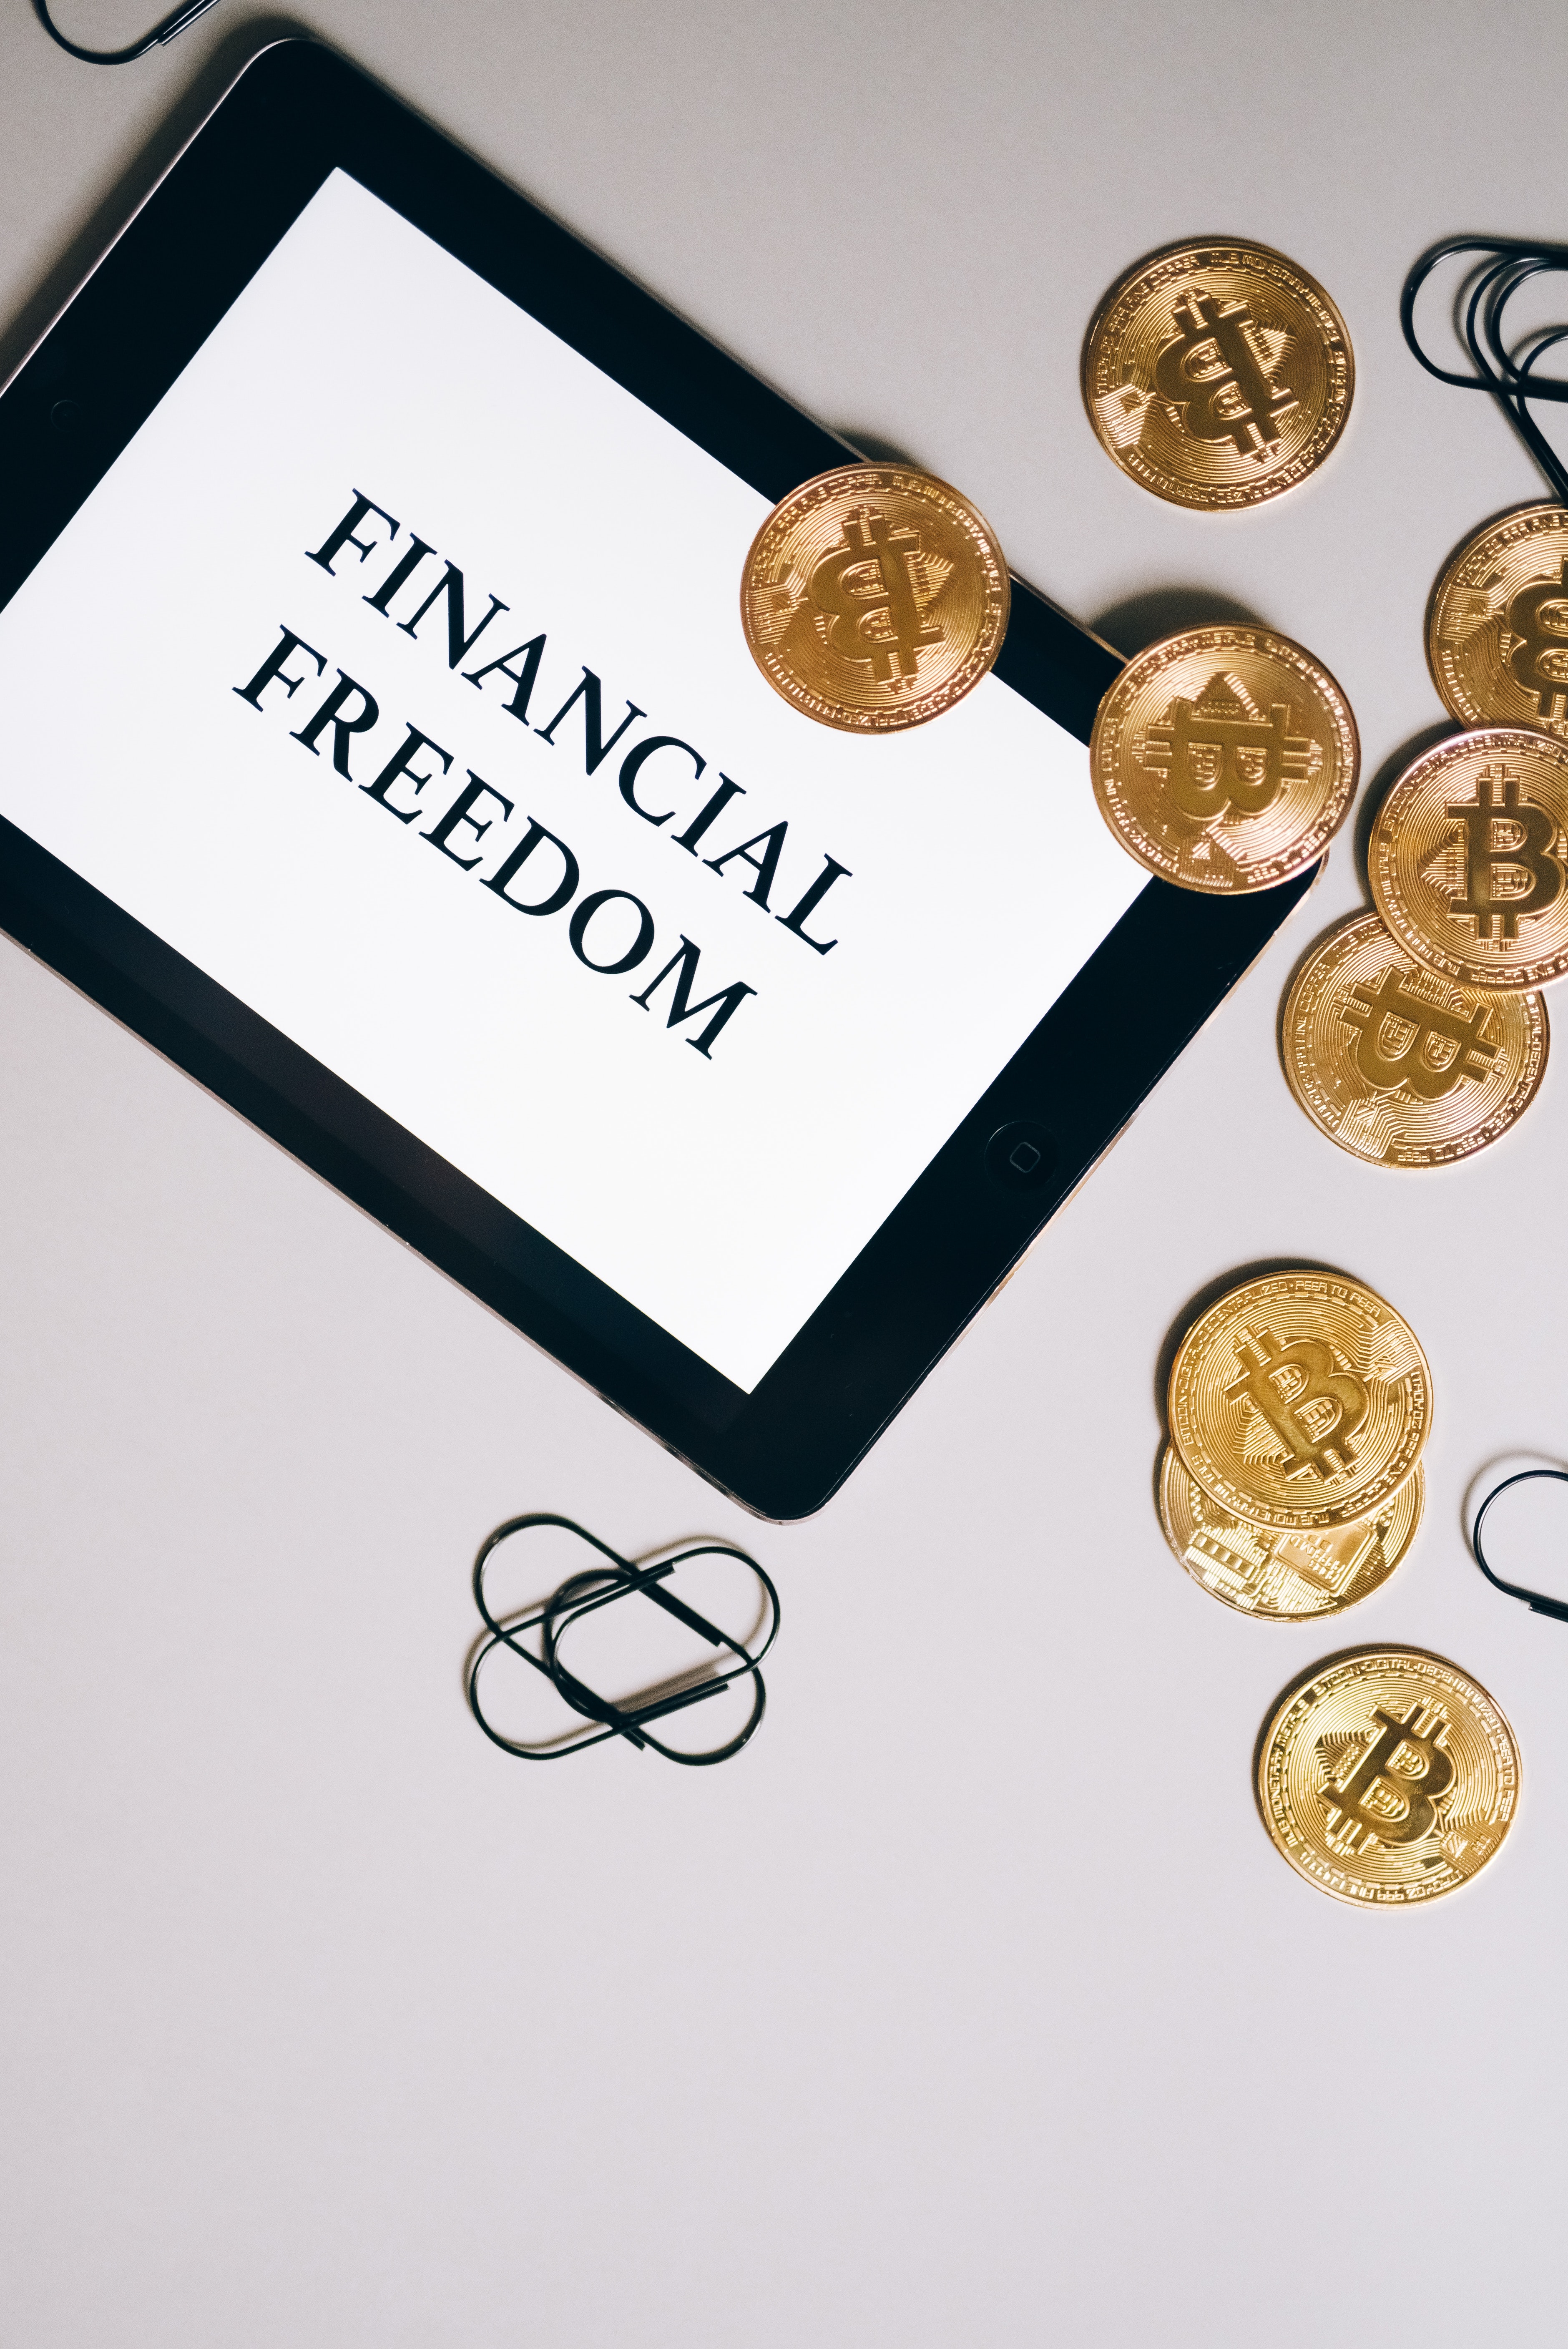 Financial Freedom Wallpapers